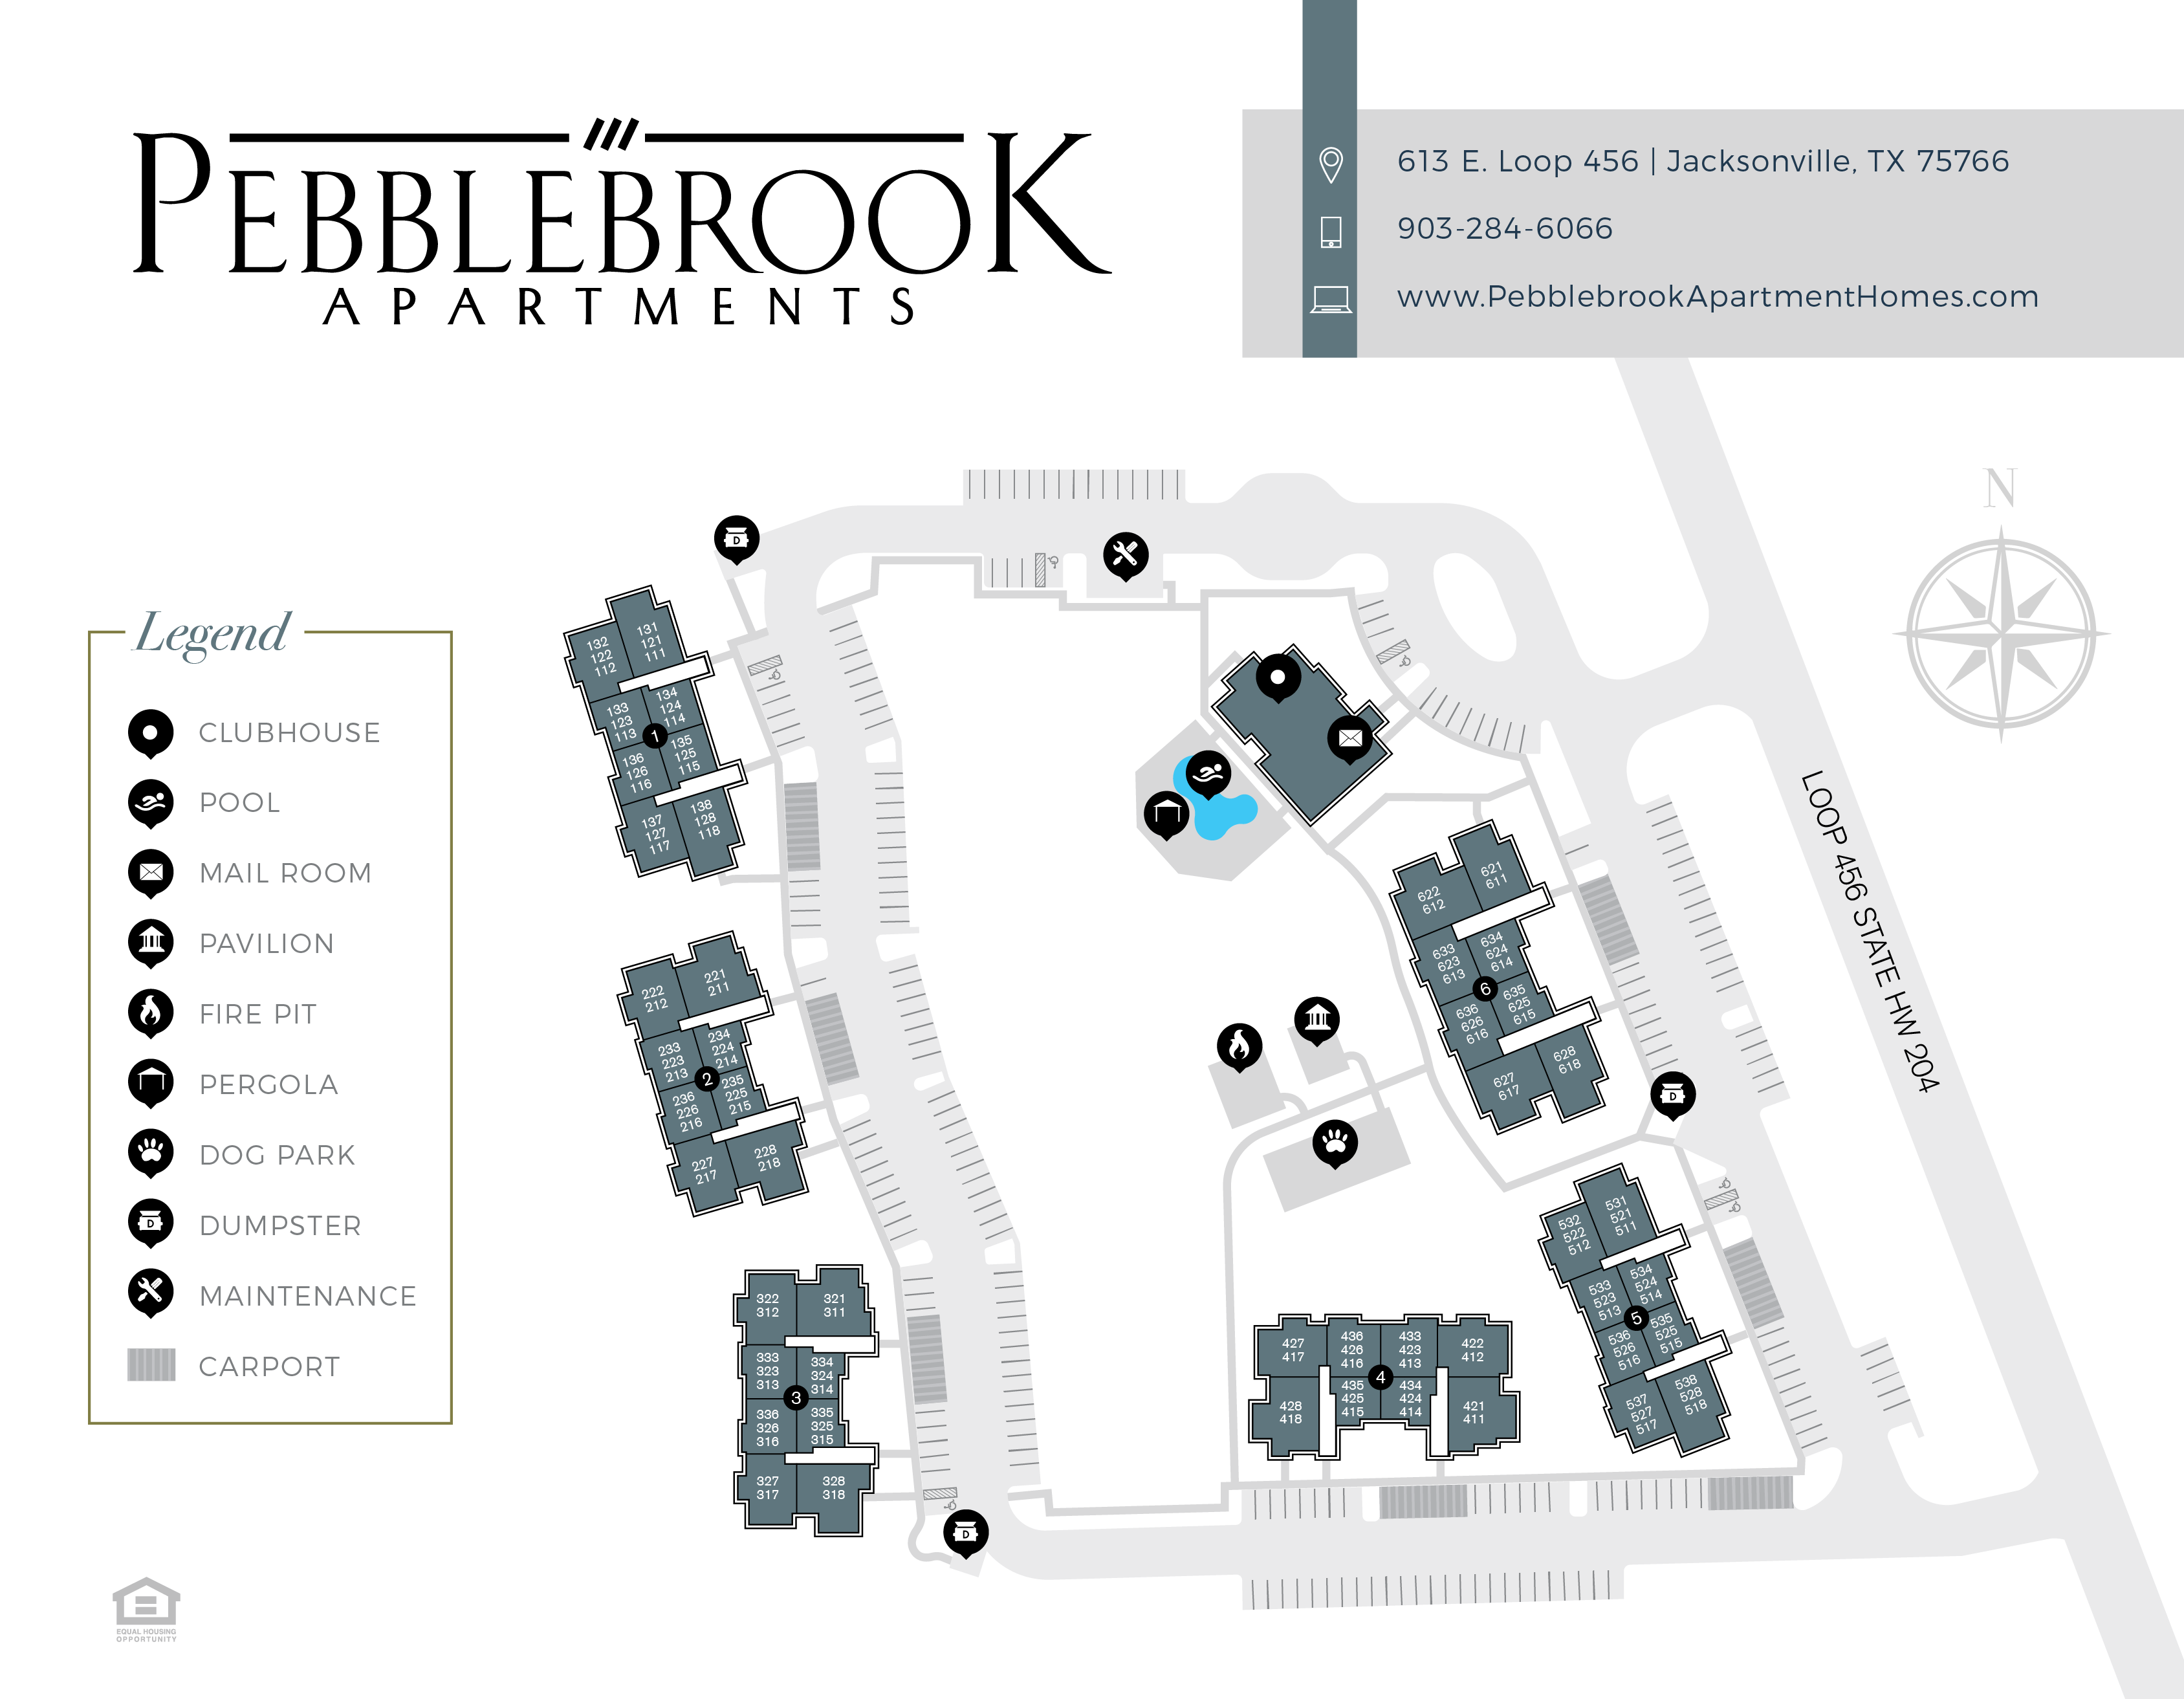 The Pebble Brook Community Page Sitemap Image